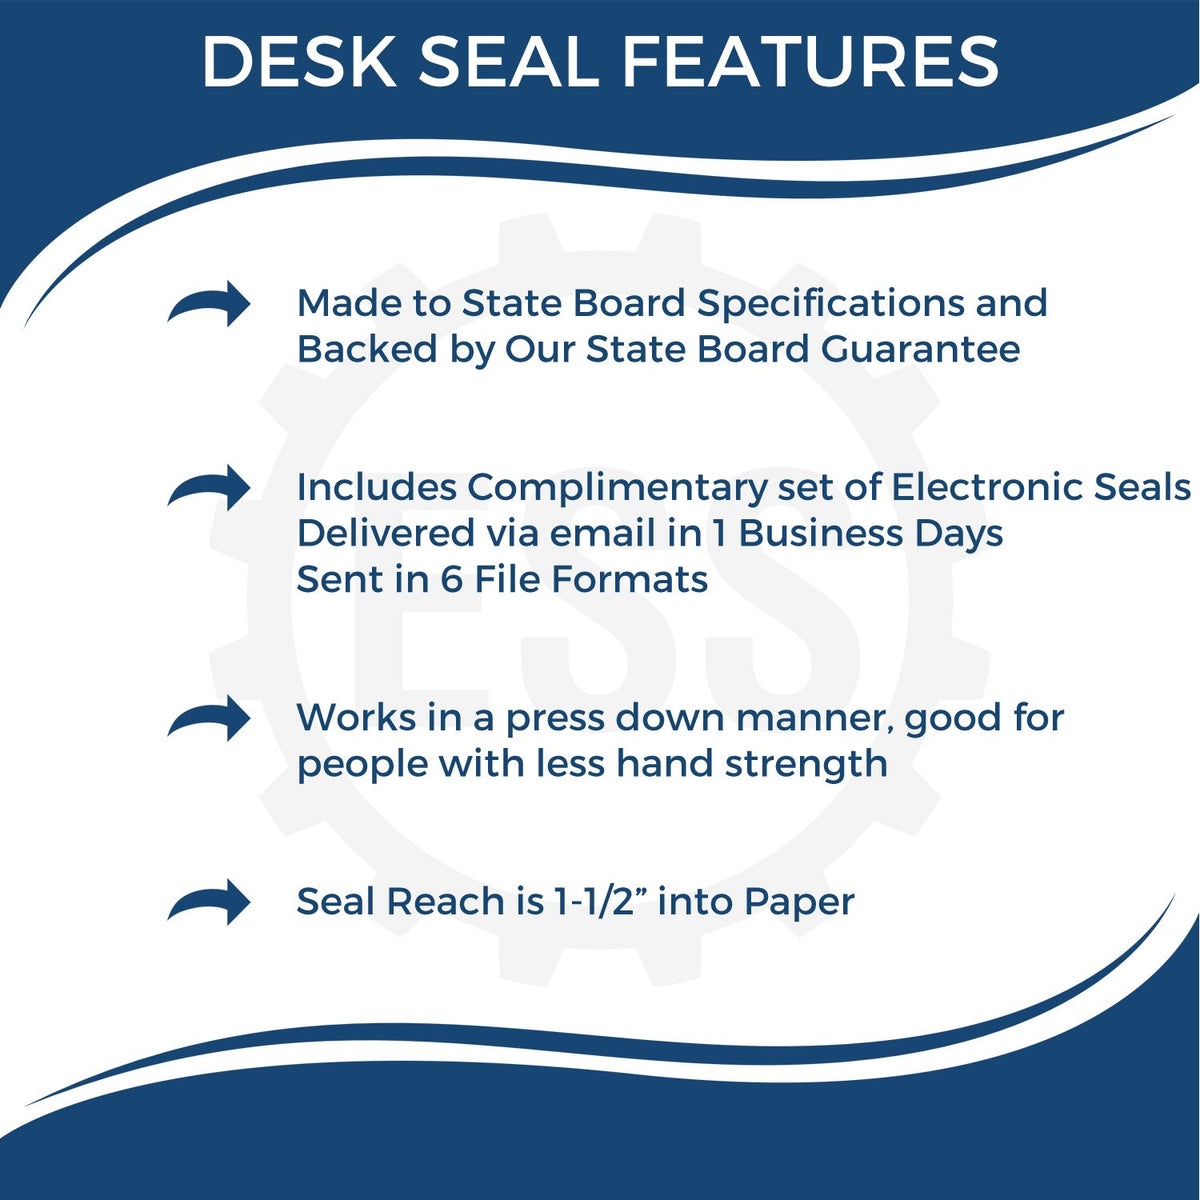 A picture of an infographic highlighting the selling points for the District of Columbia Desk Architect Embossing Seal